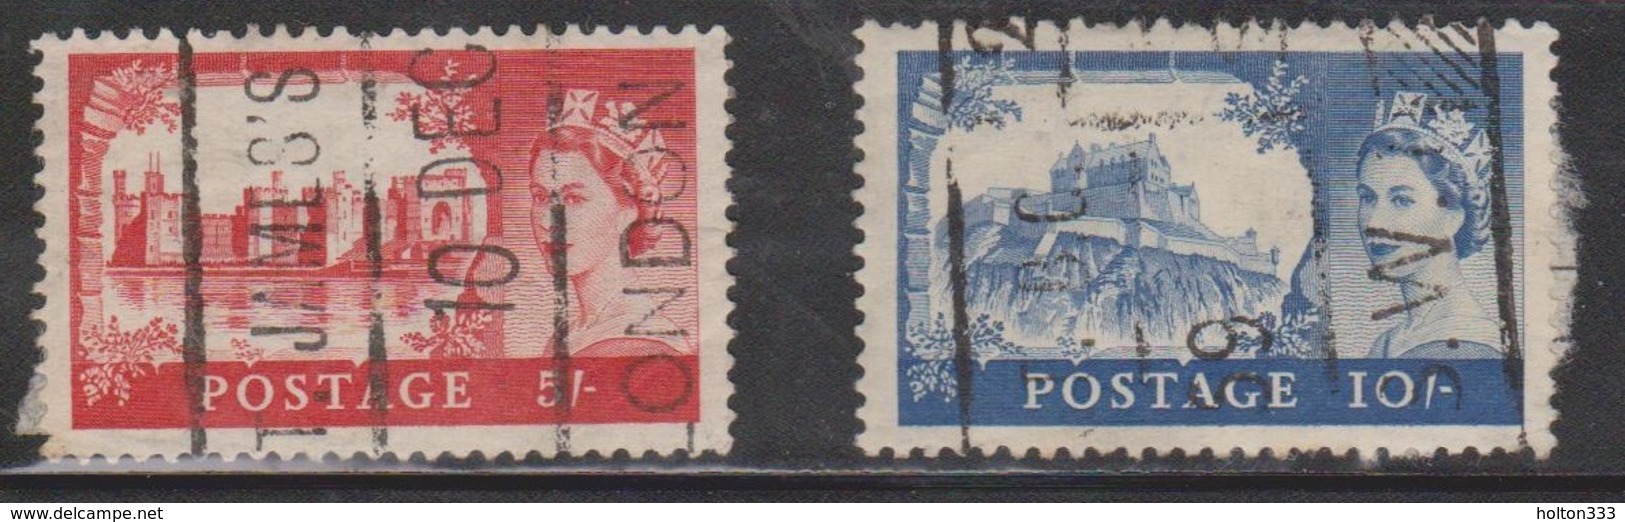 GREAT BRITAIN  Scott # 372-3 Used  - QEII Castles Issue - Used Stamps